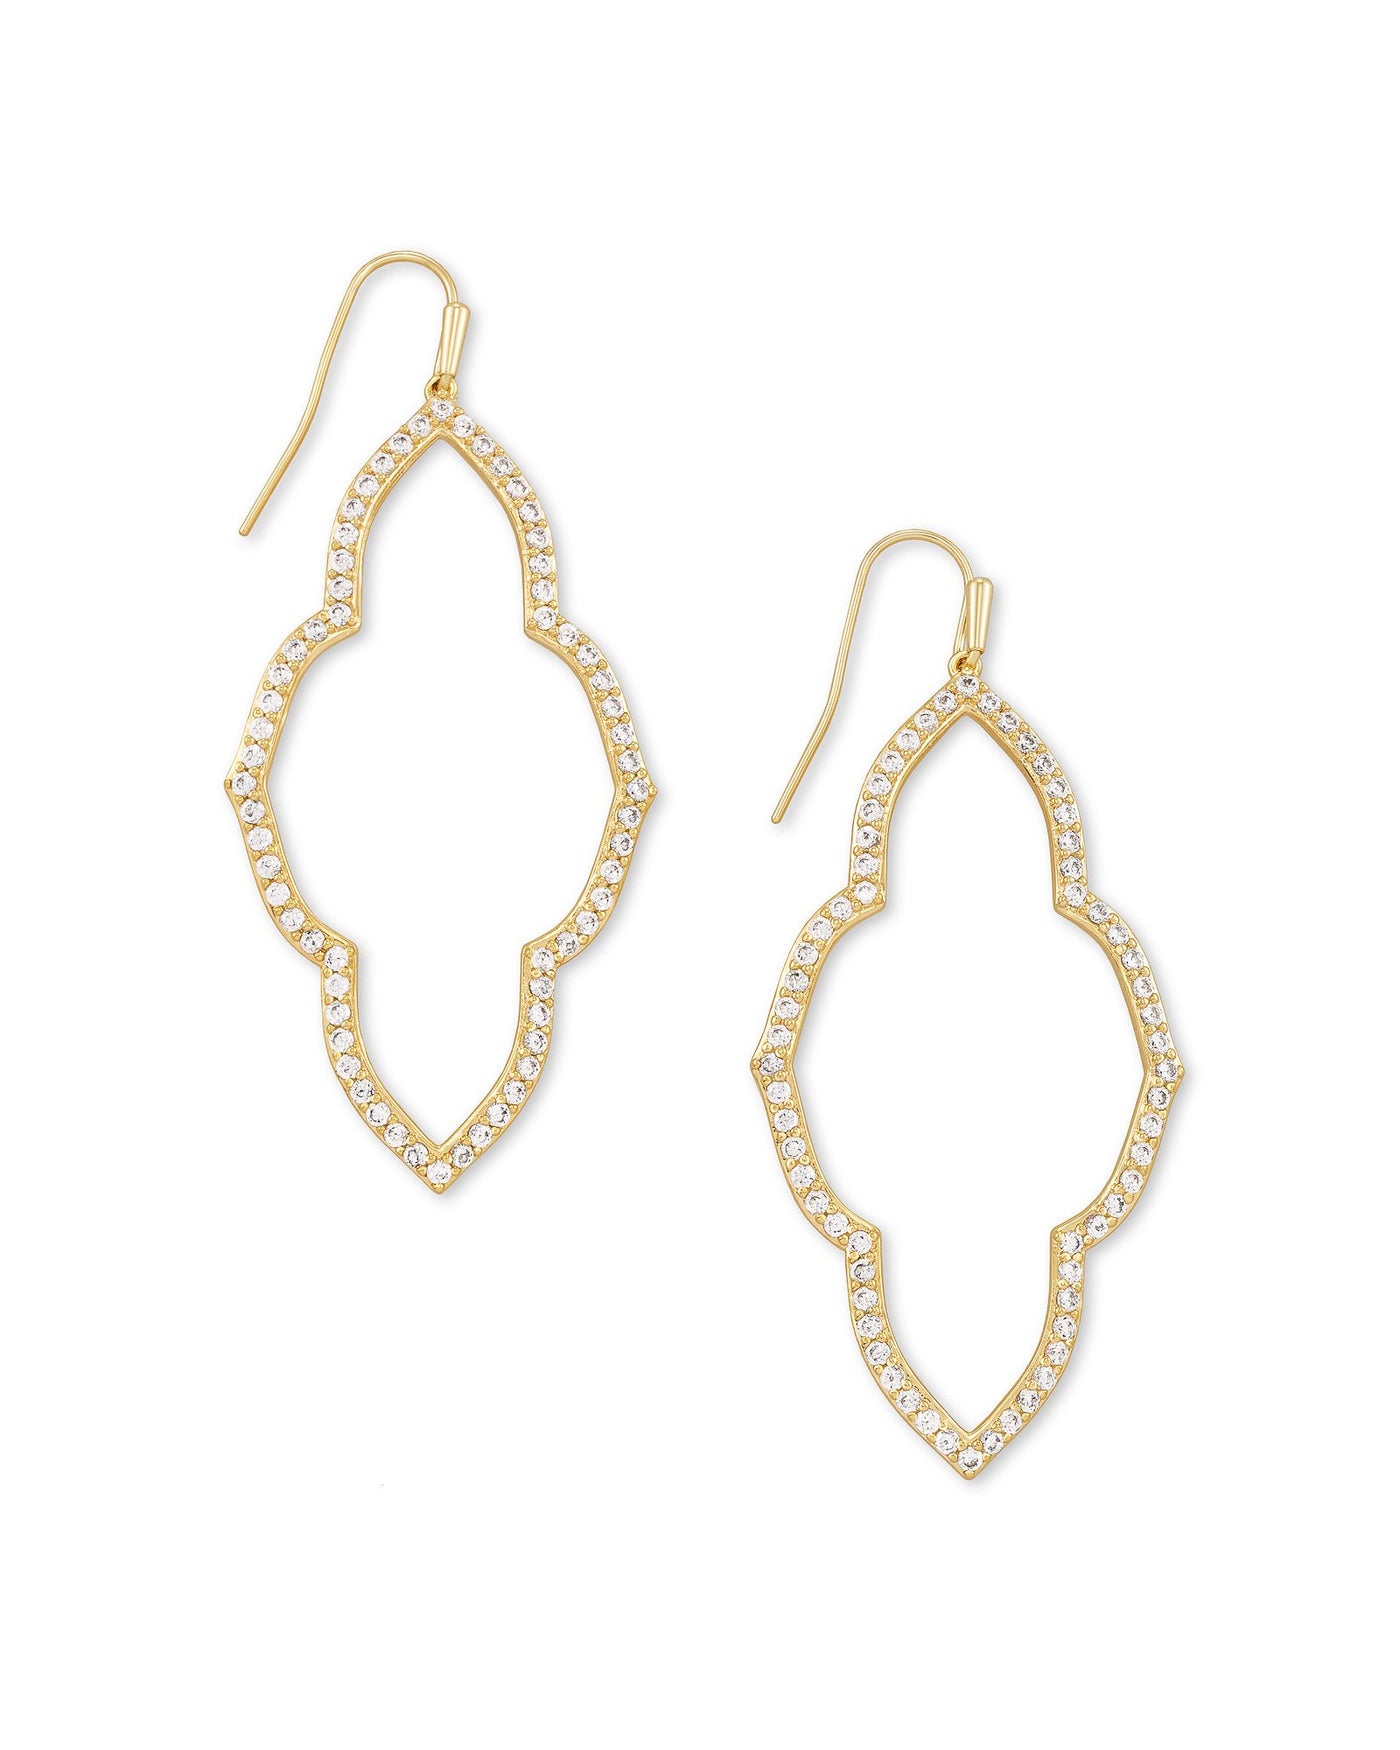 Abbie Open Frame Earrings Gold on white background, front view.